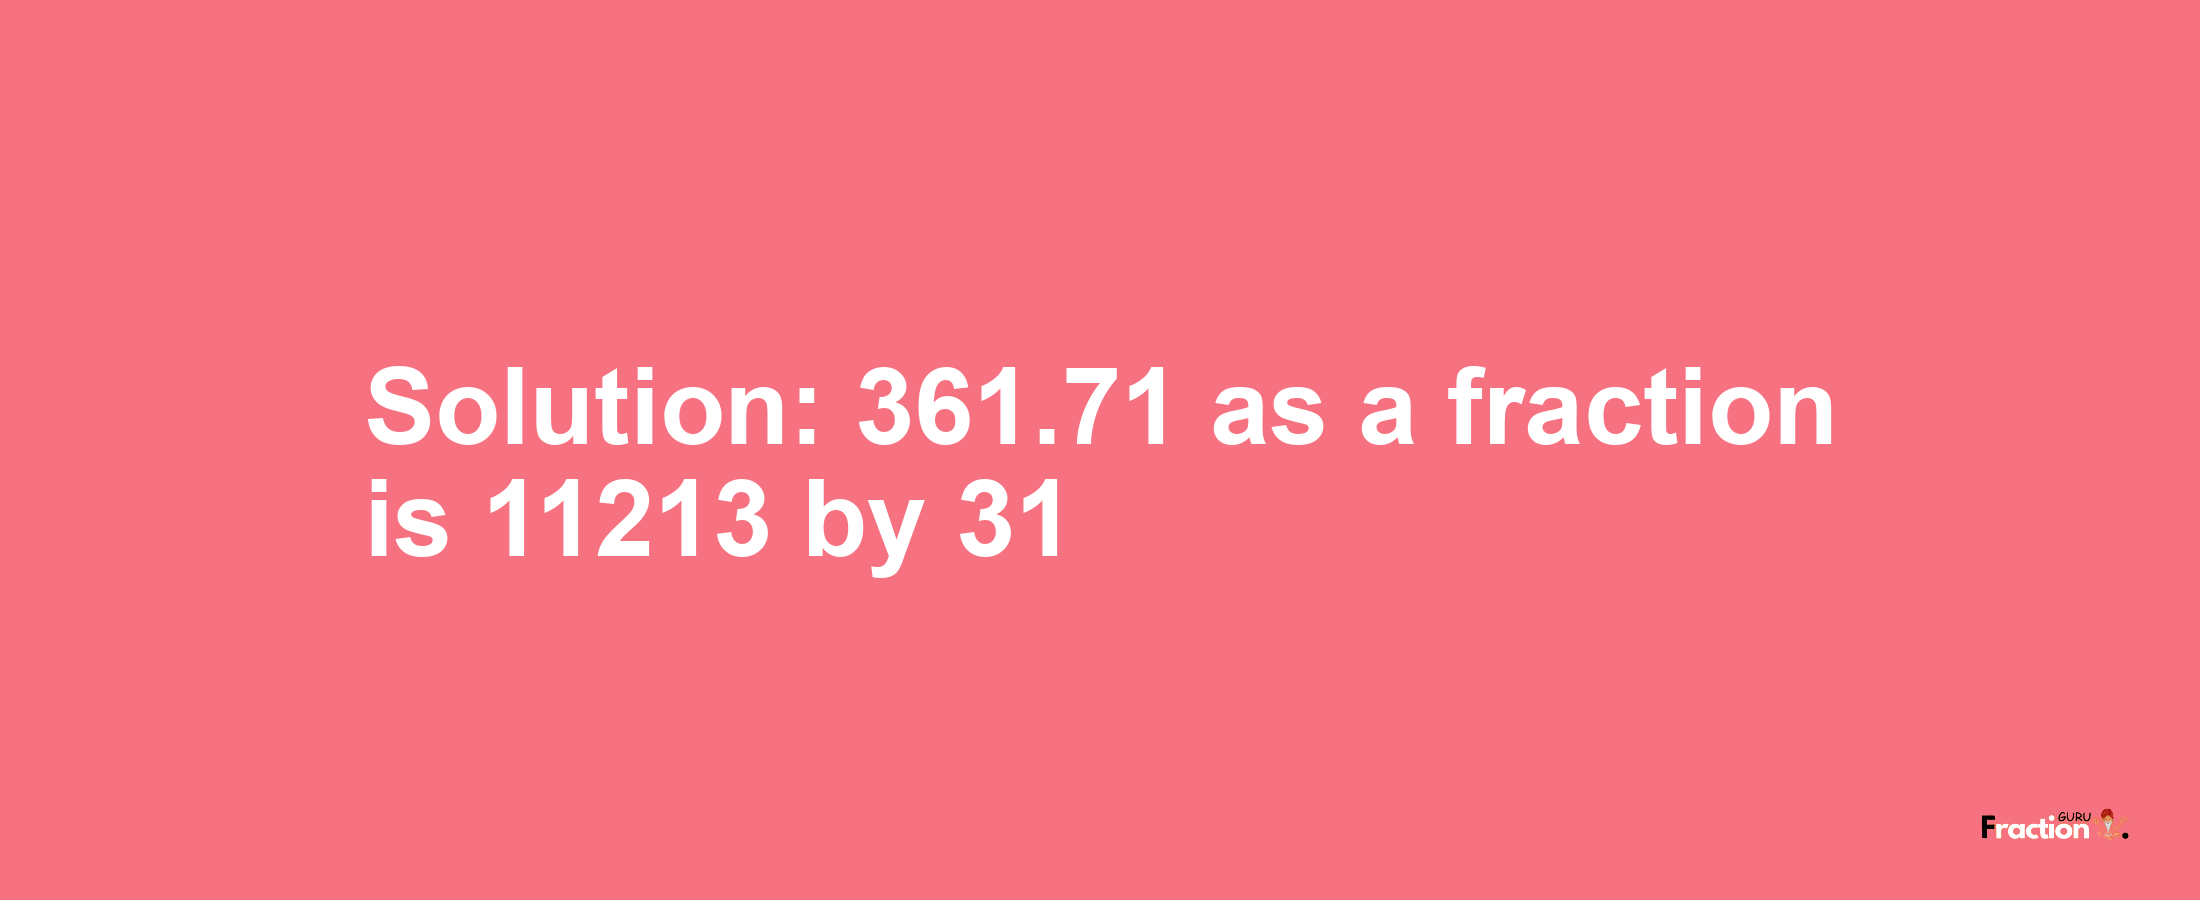 Solution:361.71 as a fraction is 11213/31